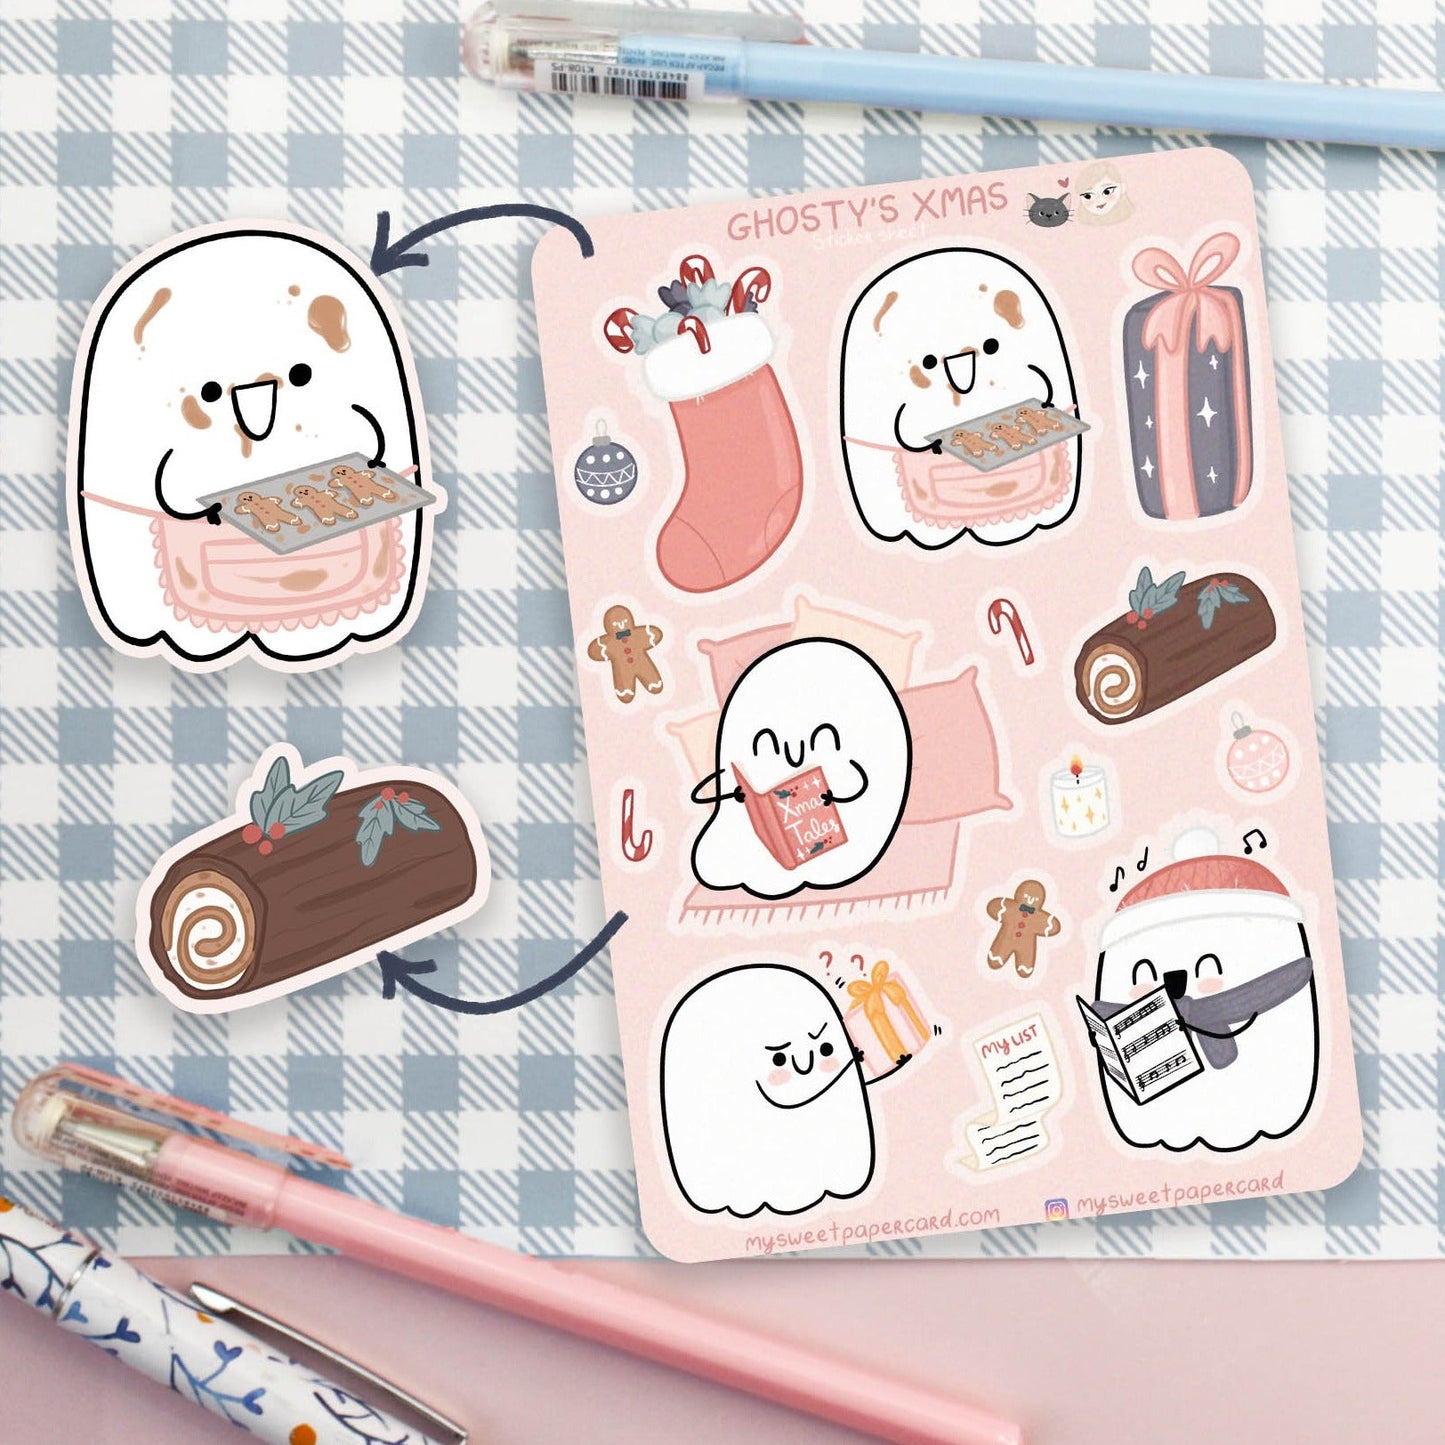 stickers little ghost christmas planning